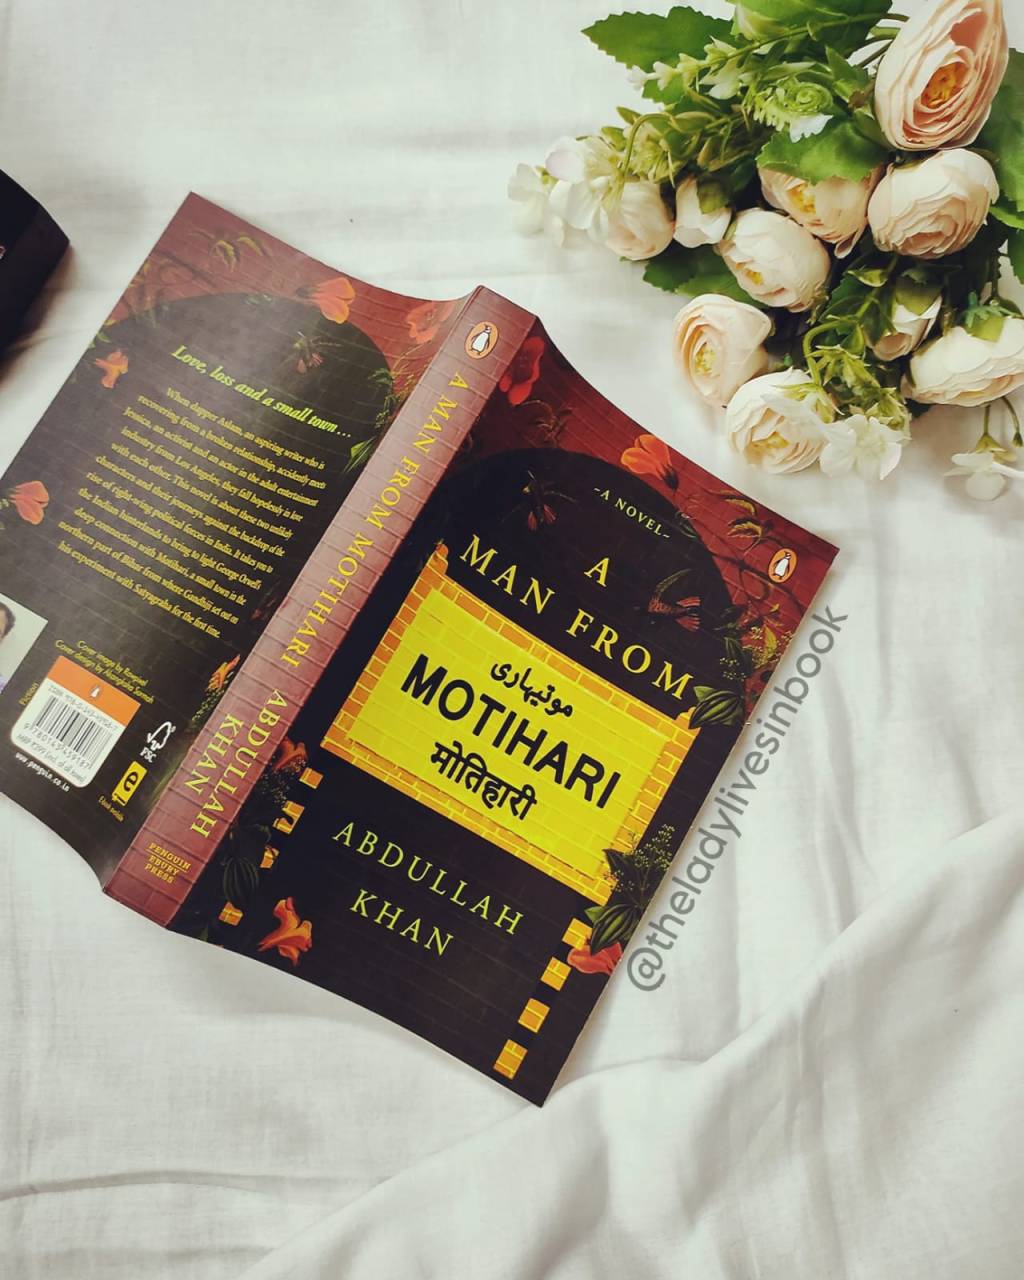 Any book disappointed you lately? – Book Review of A Man From Motihari by Abdullah Khan